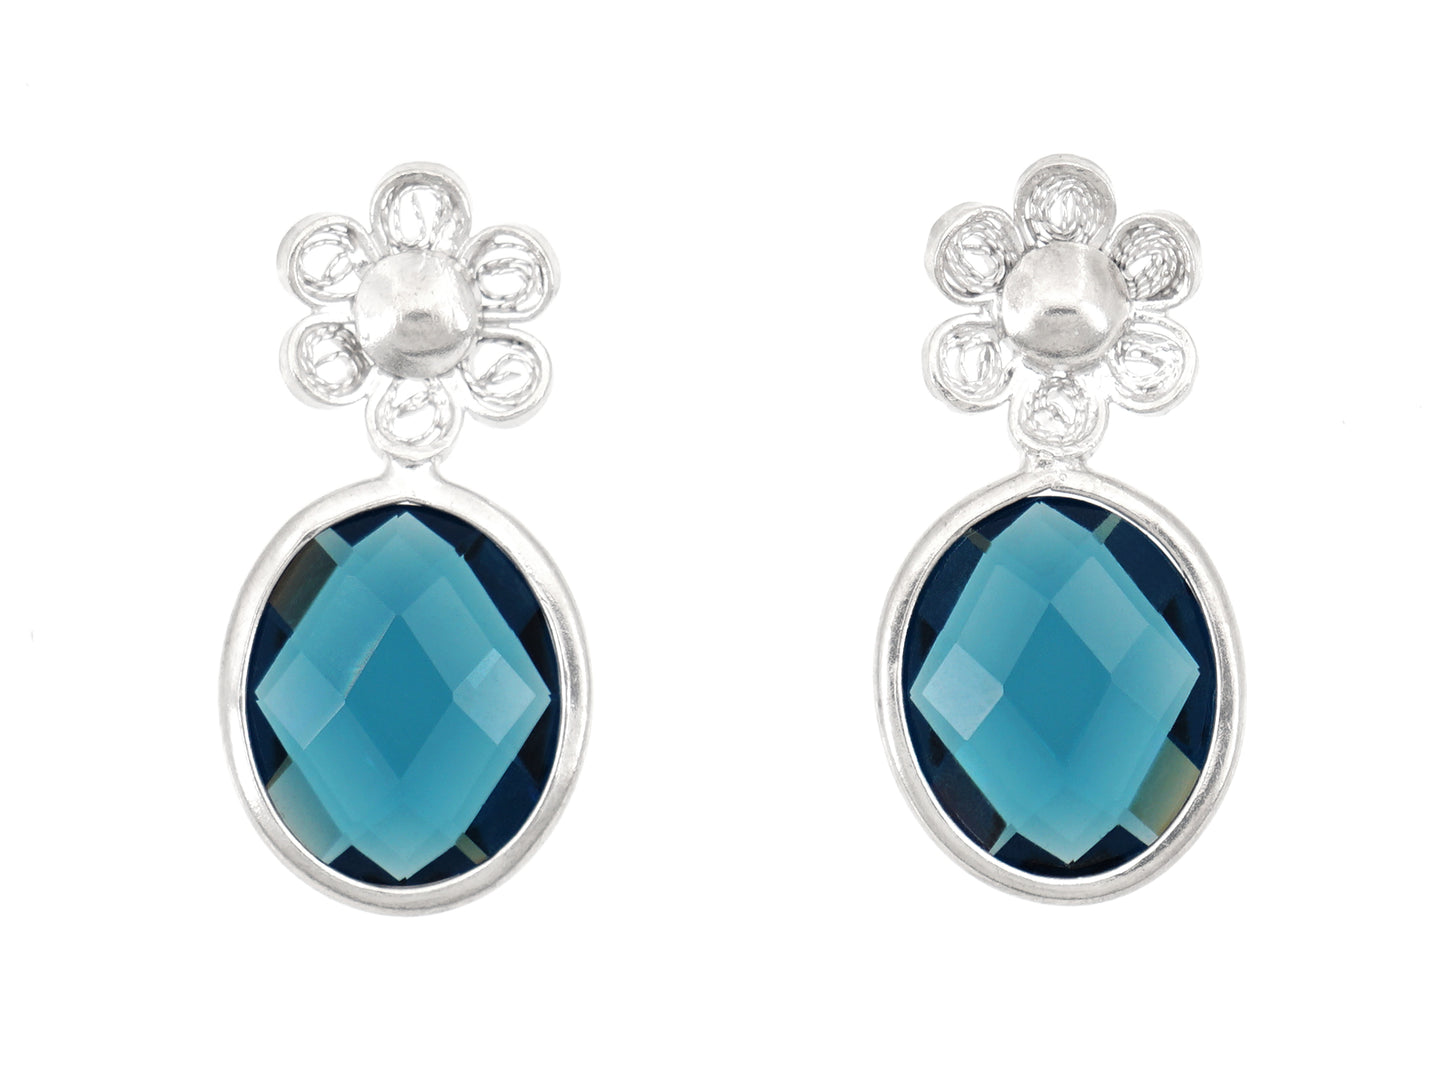 Flower and Blue Stone Earrings, Portuguese Filigree, 925 Sterling Silver